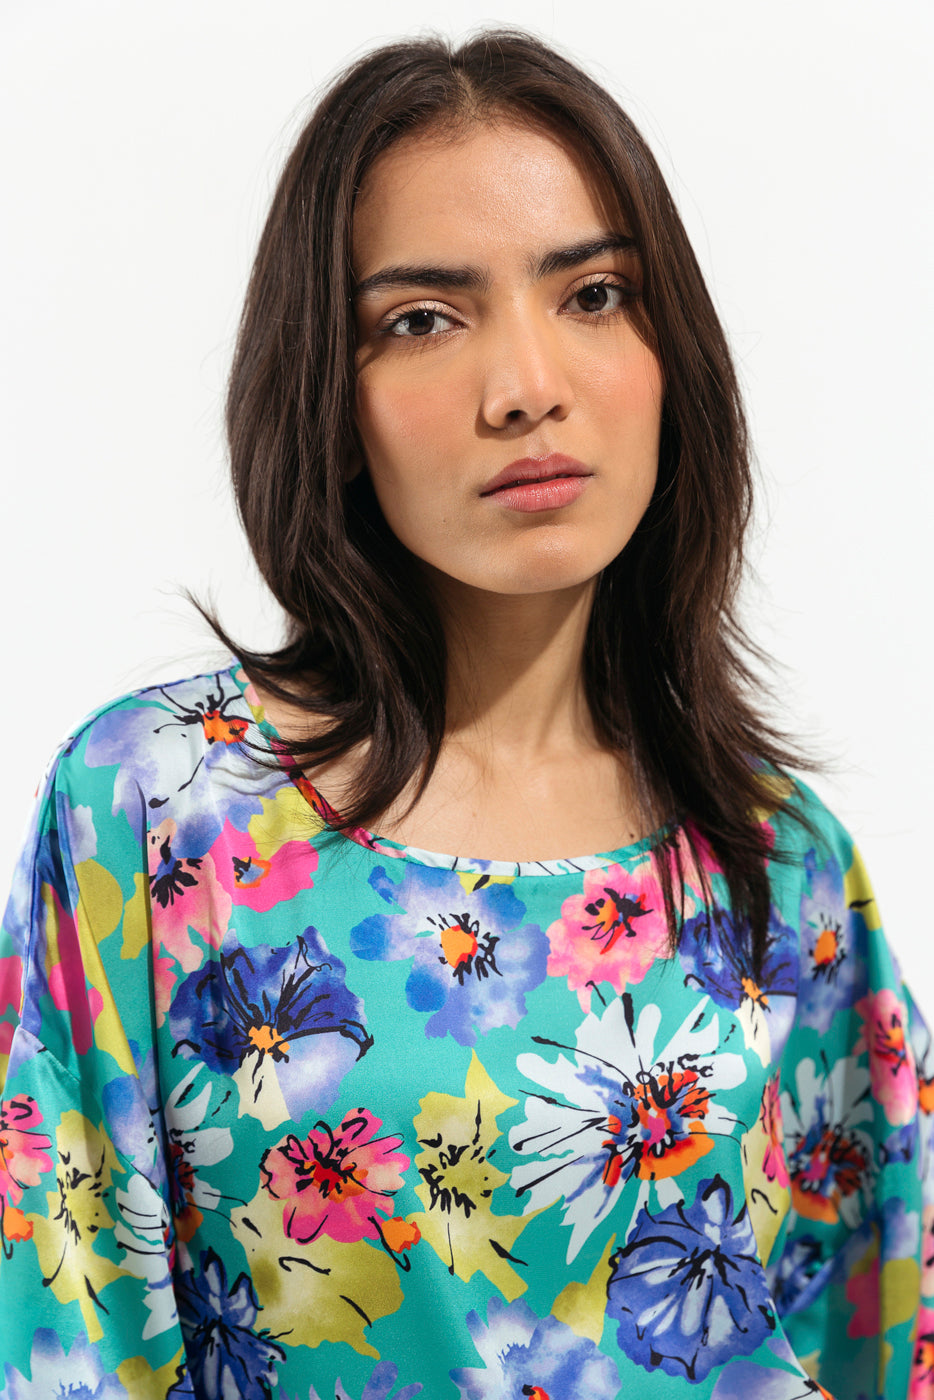 SEA GREEN ABSTRACT FLORAL TOP